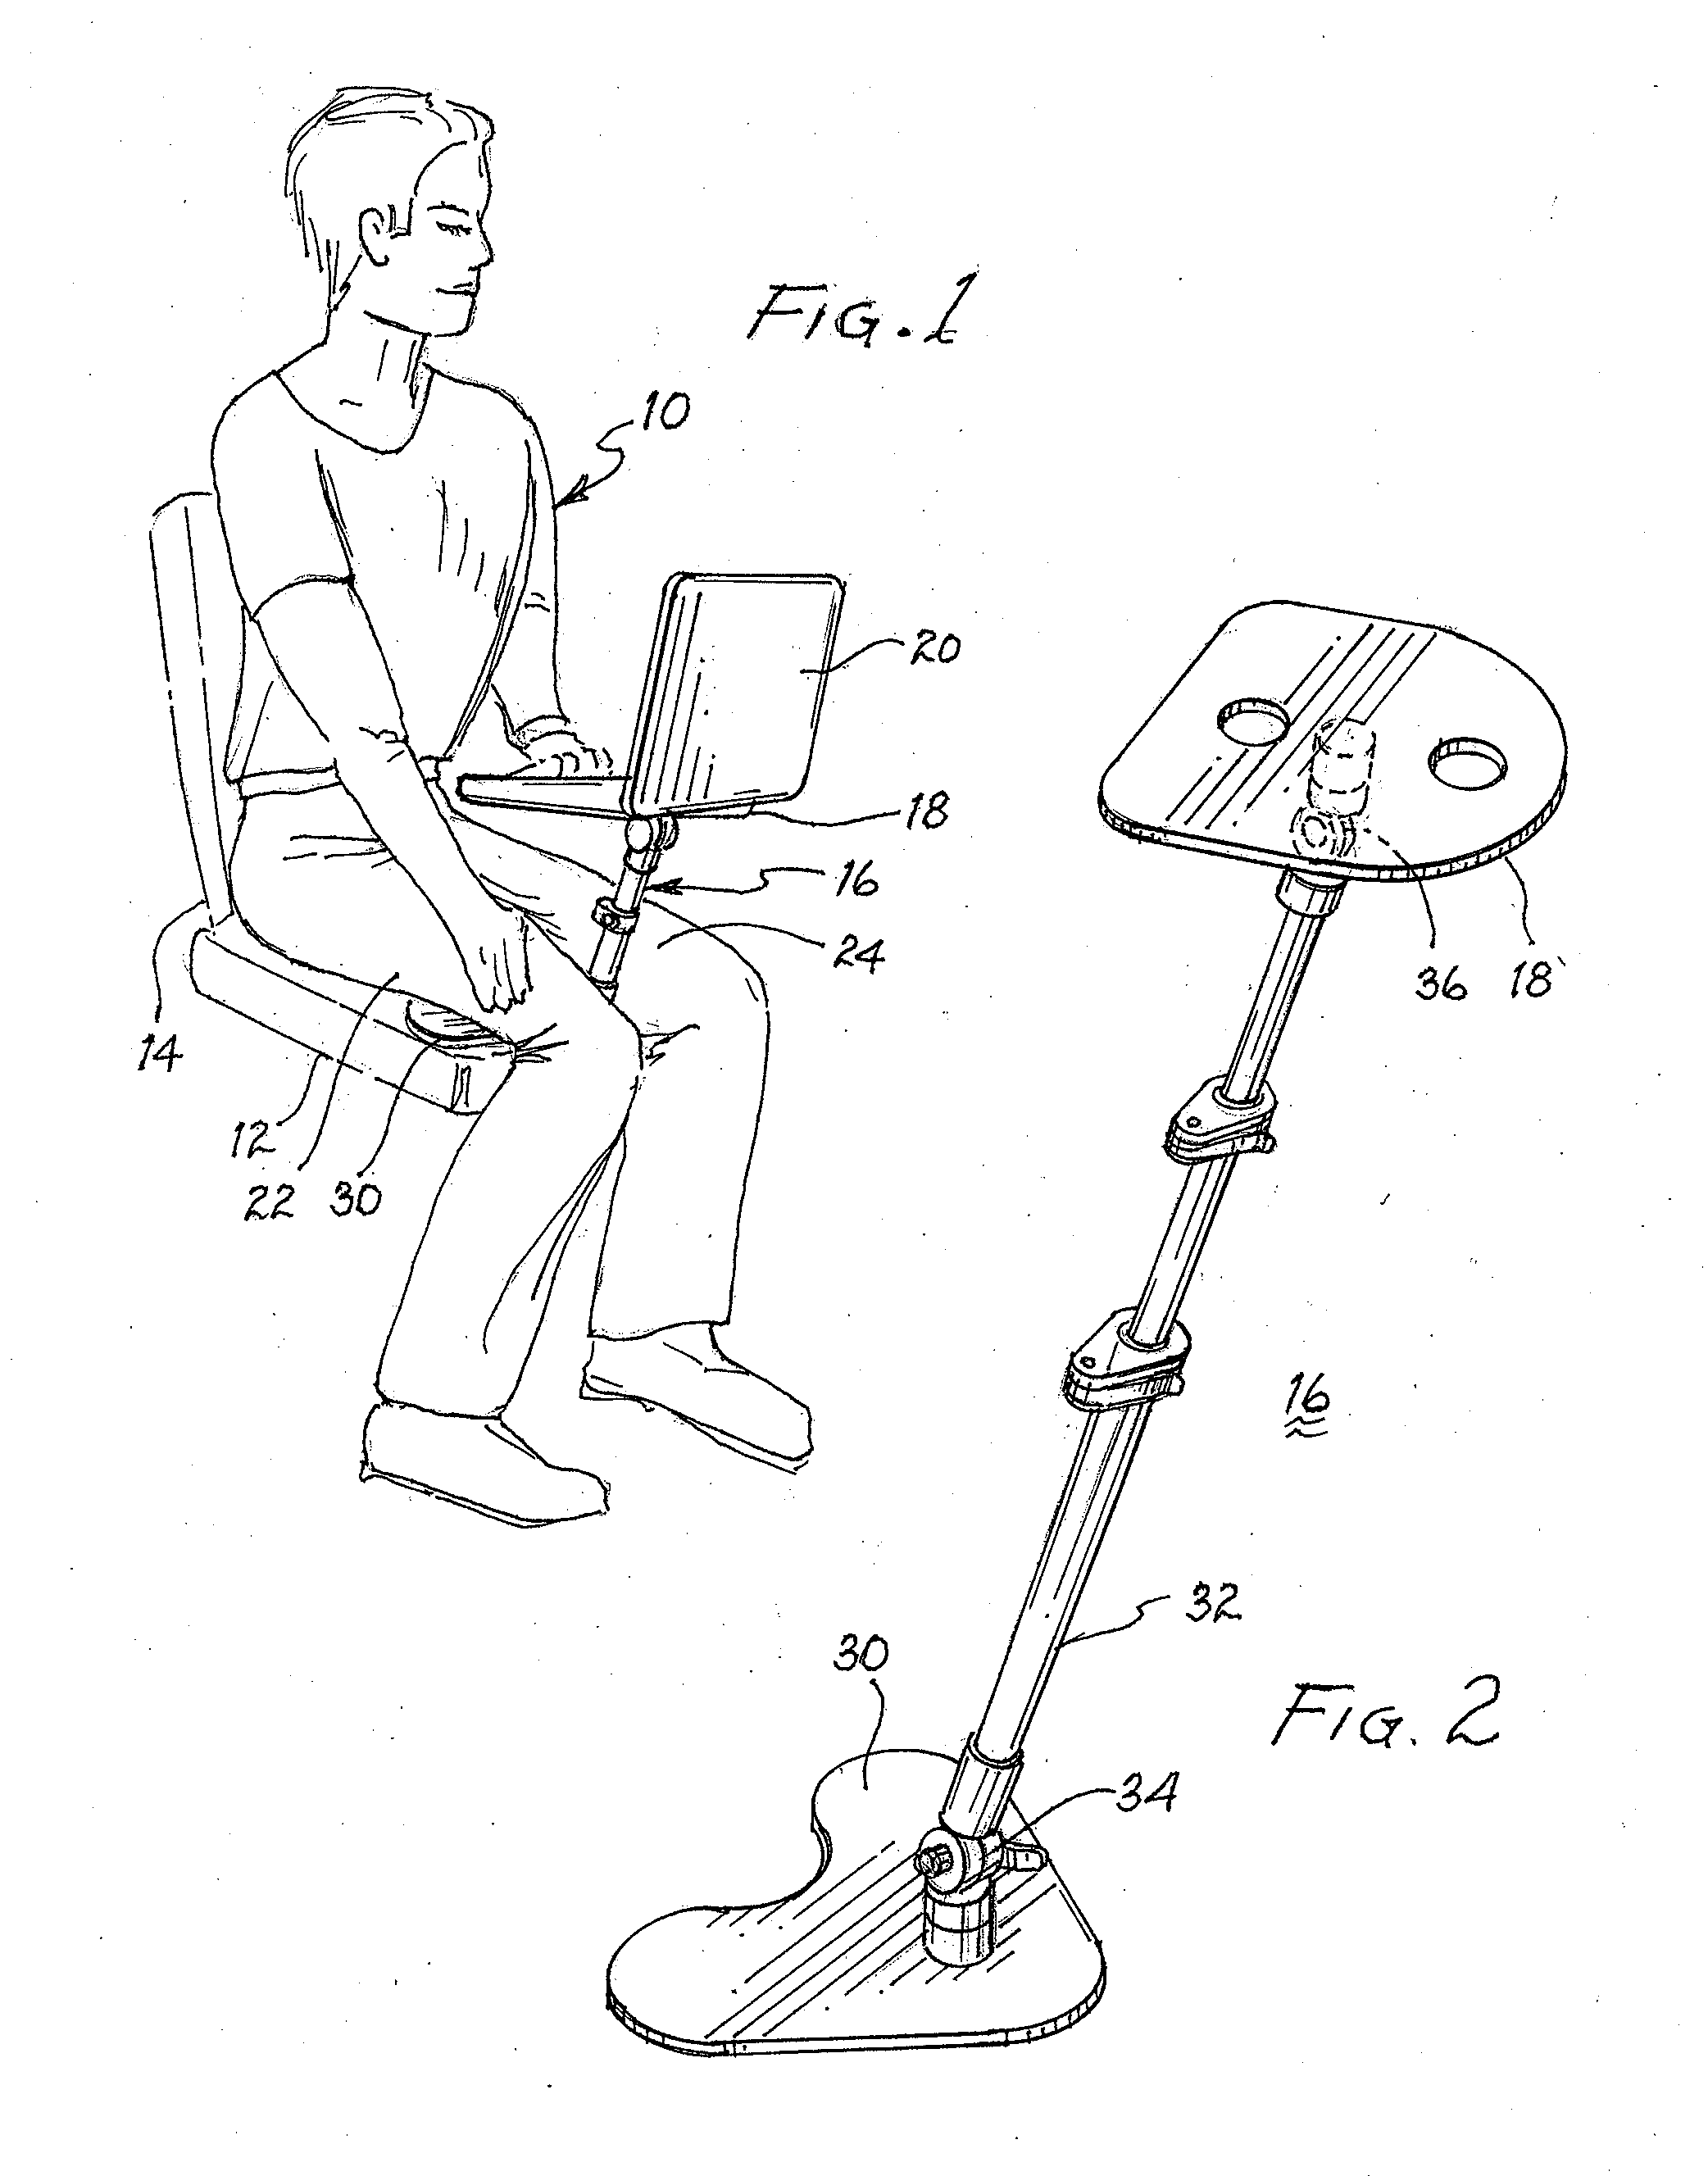 Headrest and work surface apparatus